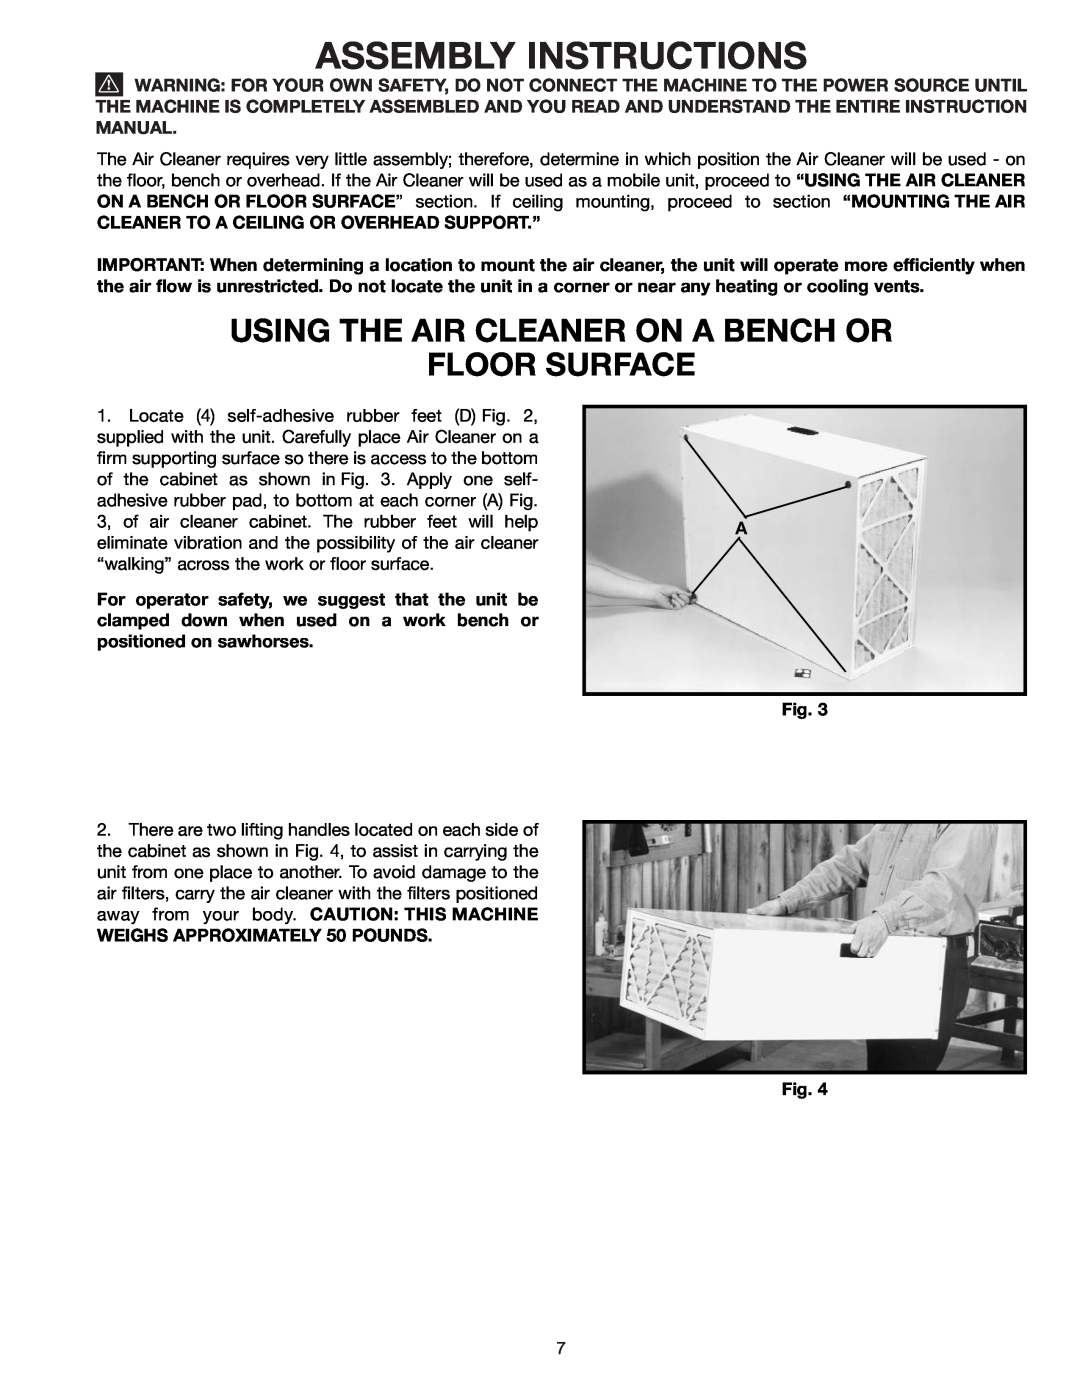 Delta AP200 instruction manual Assembly Instructions, Using The Air Cleaner On A Bench Or Floor Surface 